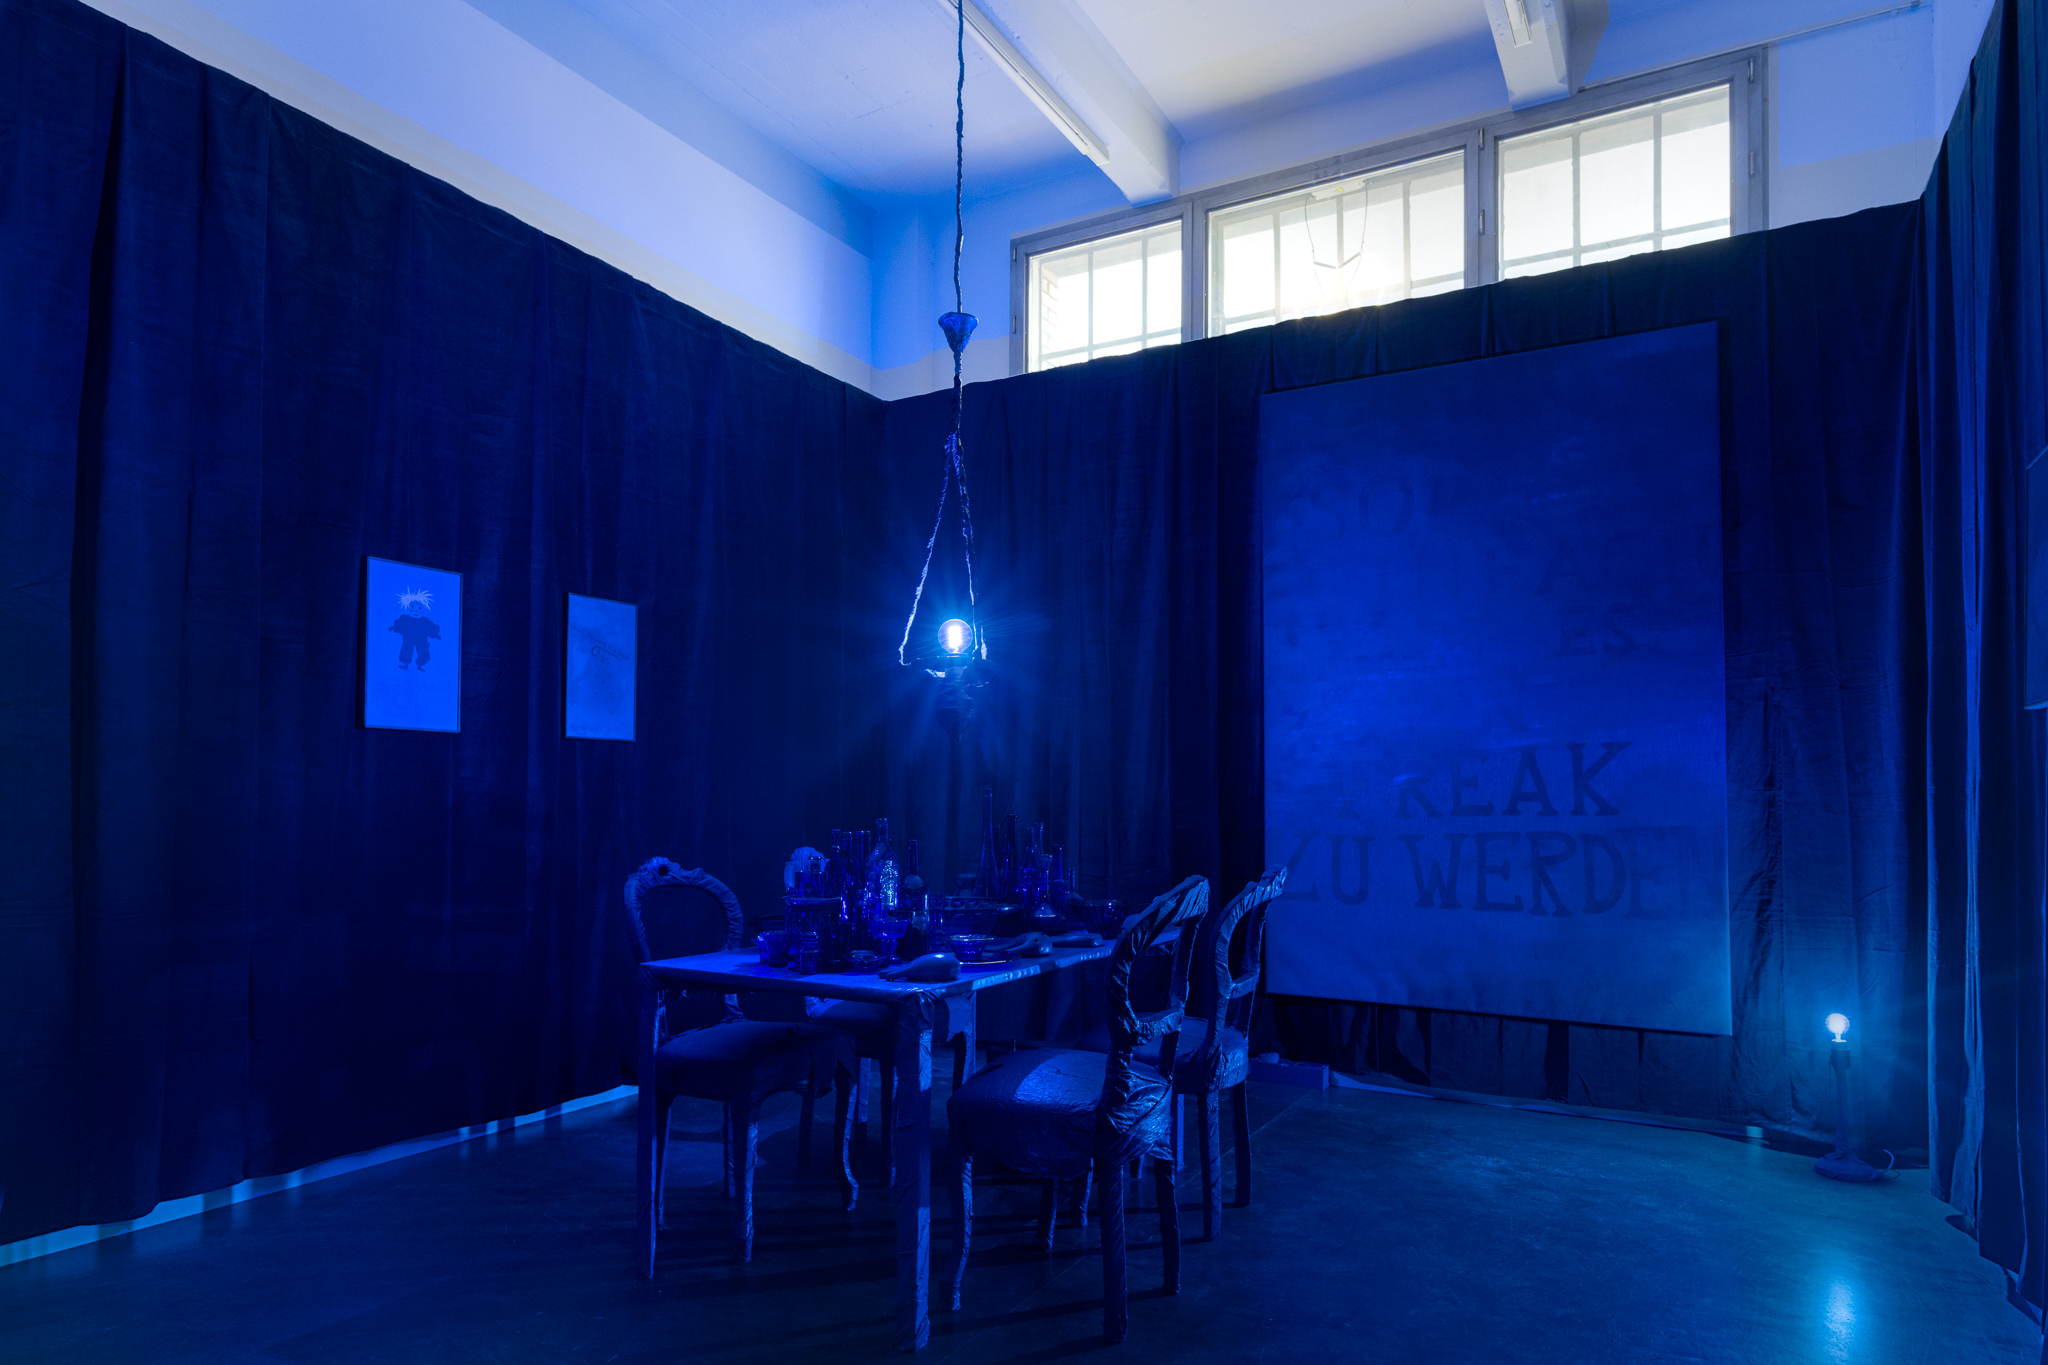 Sylvain Gelewski, Spieglein 1, installation, velvet curtains, lacquer on collected furniture wrapped into scrap canvas and textile, lacquer on collected objects and plaster, blue glass, text, sound, perfume, 300 x 450 x 450 cm, Sihl Delta, Zurich, 2024